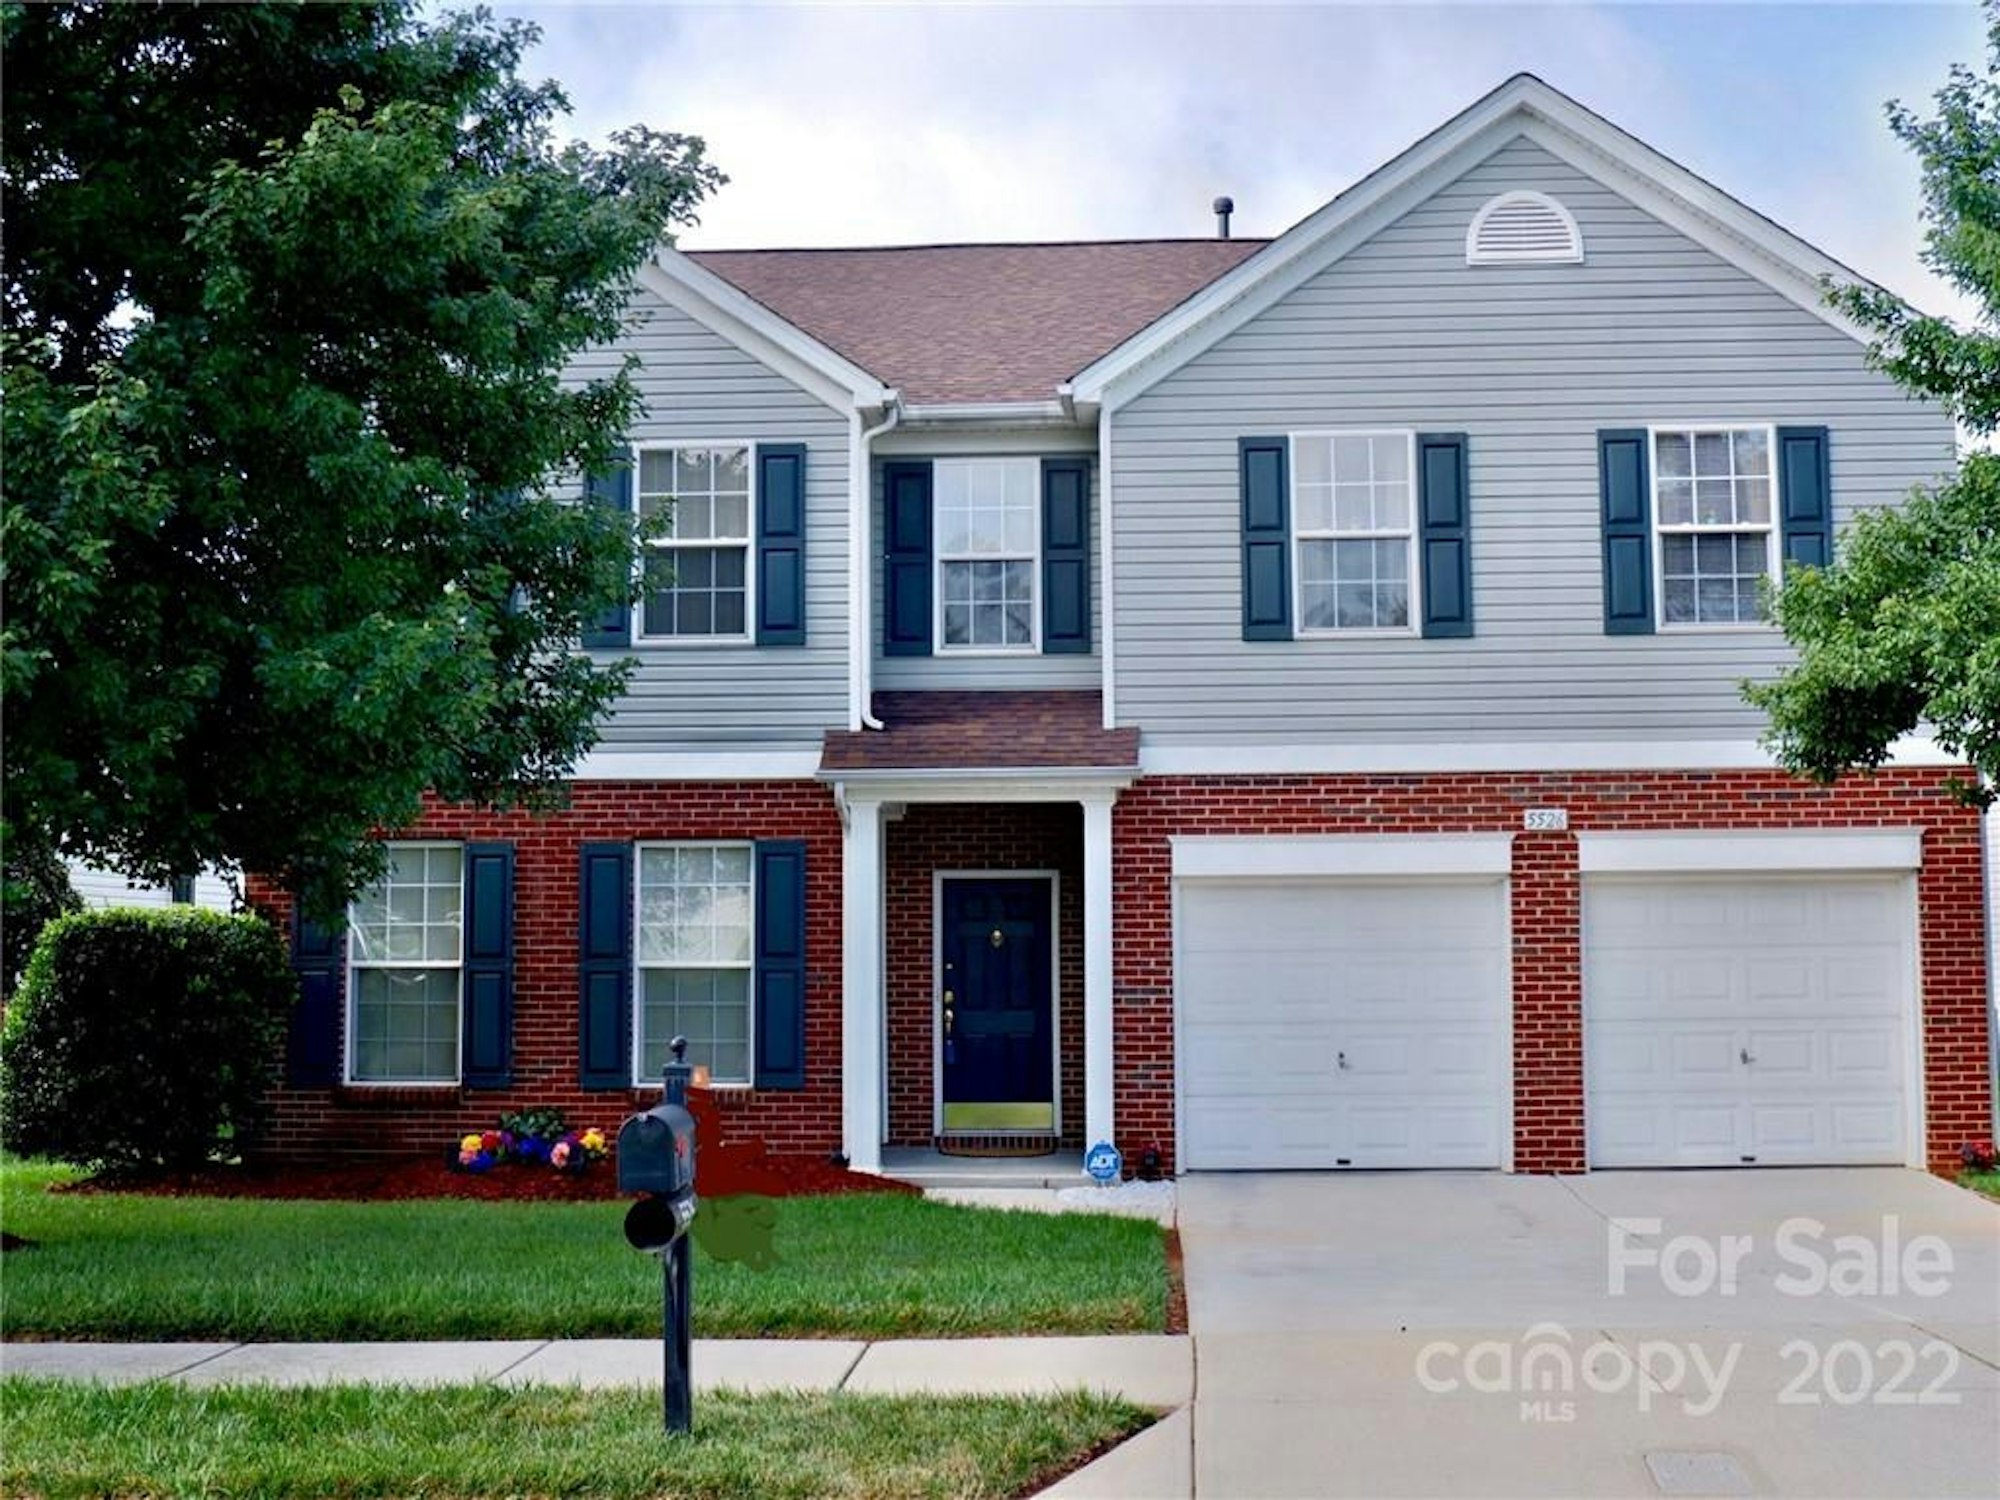 Photo 1 of 14 - 5526 Old Meadow Rd, Charlotte, NC 28227